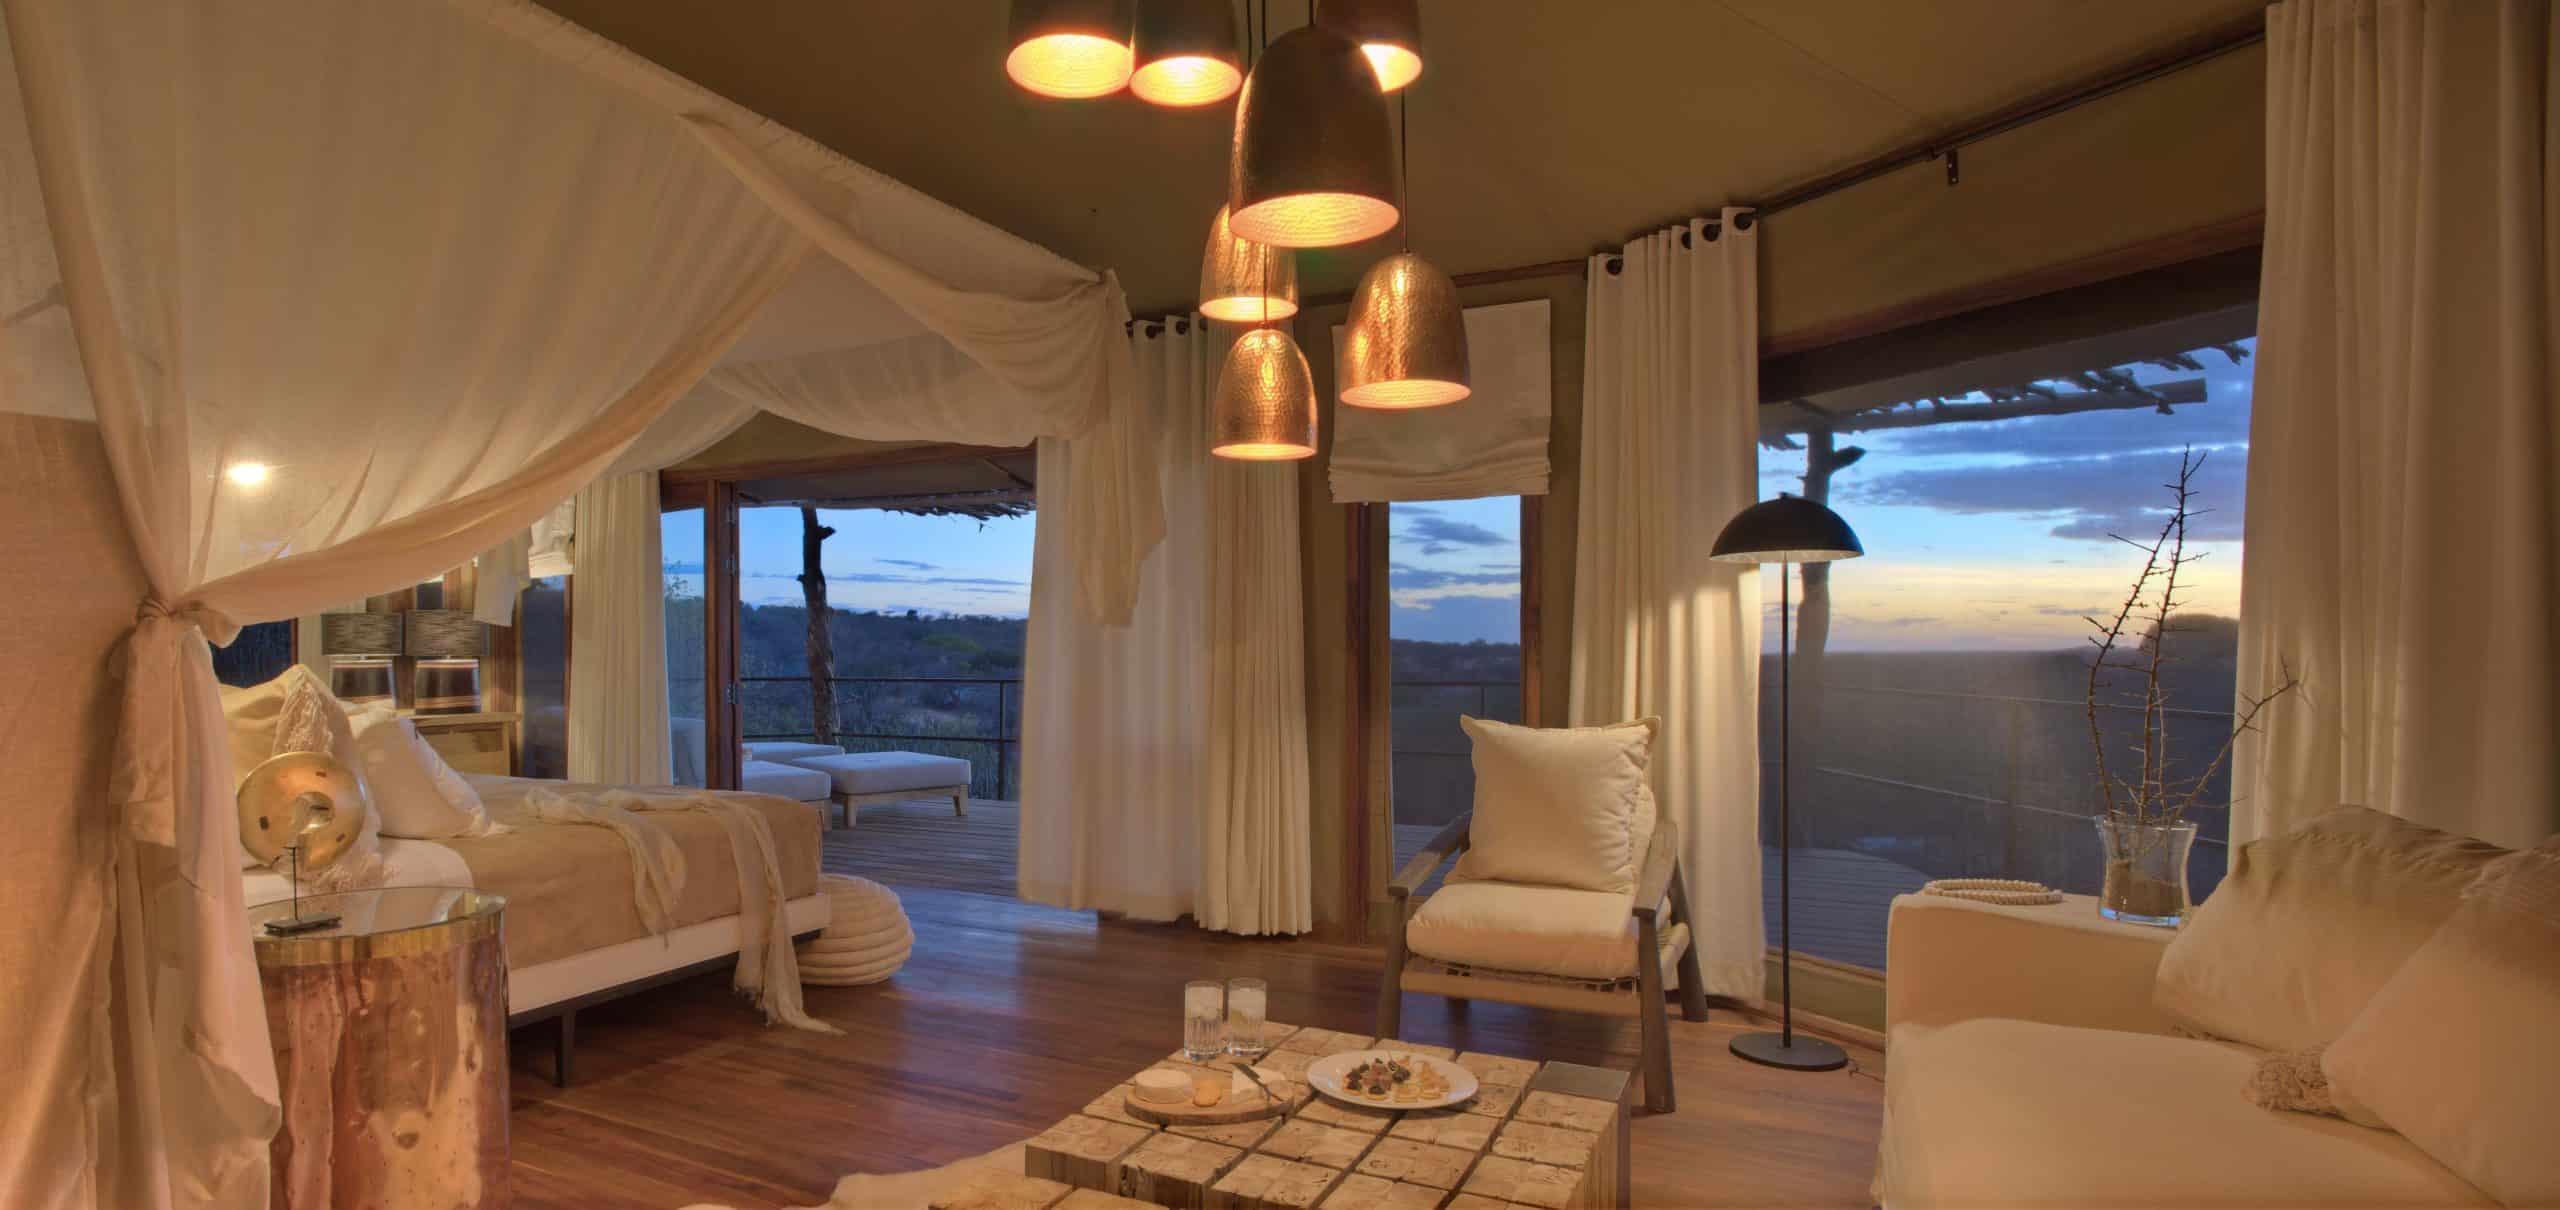 suite chambre luxe lodge hotel nuit tanzanie